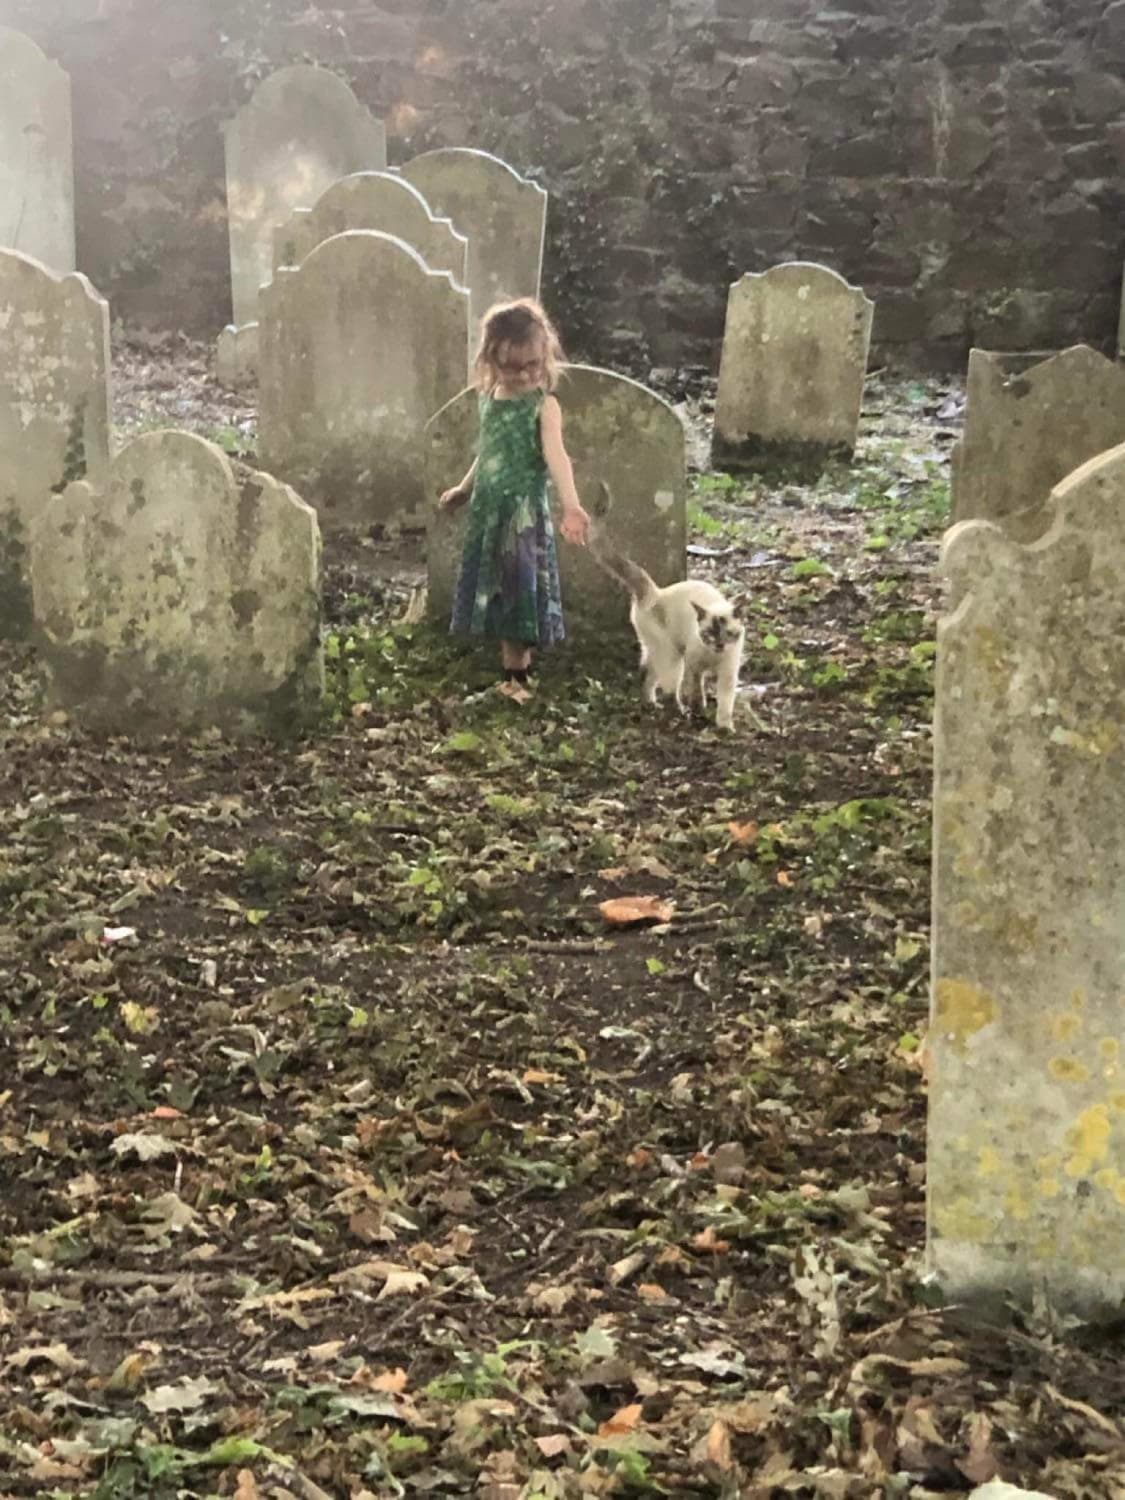 Thought you all might appreciate my goddaughter making friends with a cat in an ancient graveyard…she is growing into such a lovely little witch 🧙‍♀️ (photo courtesy of her mother)